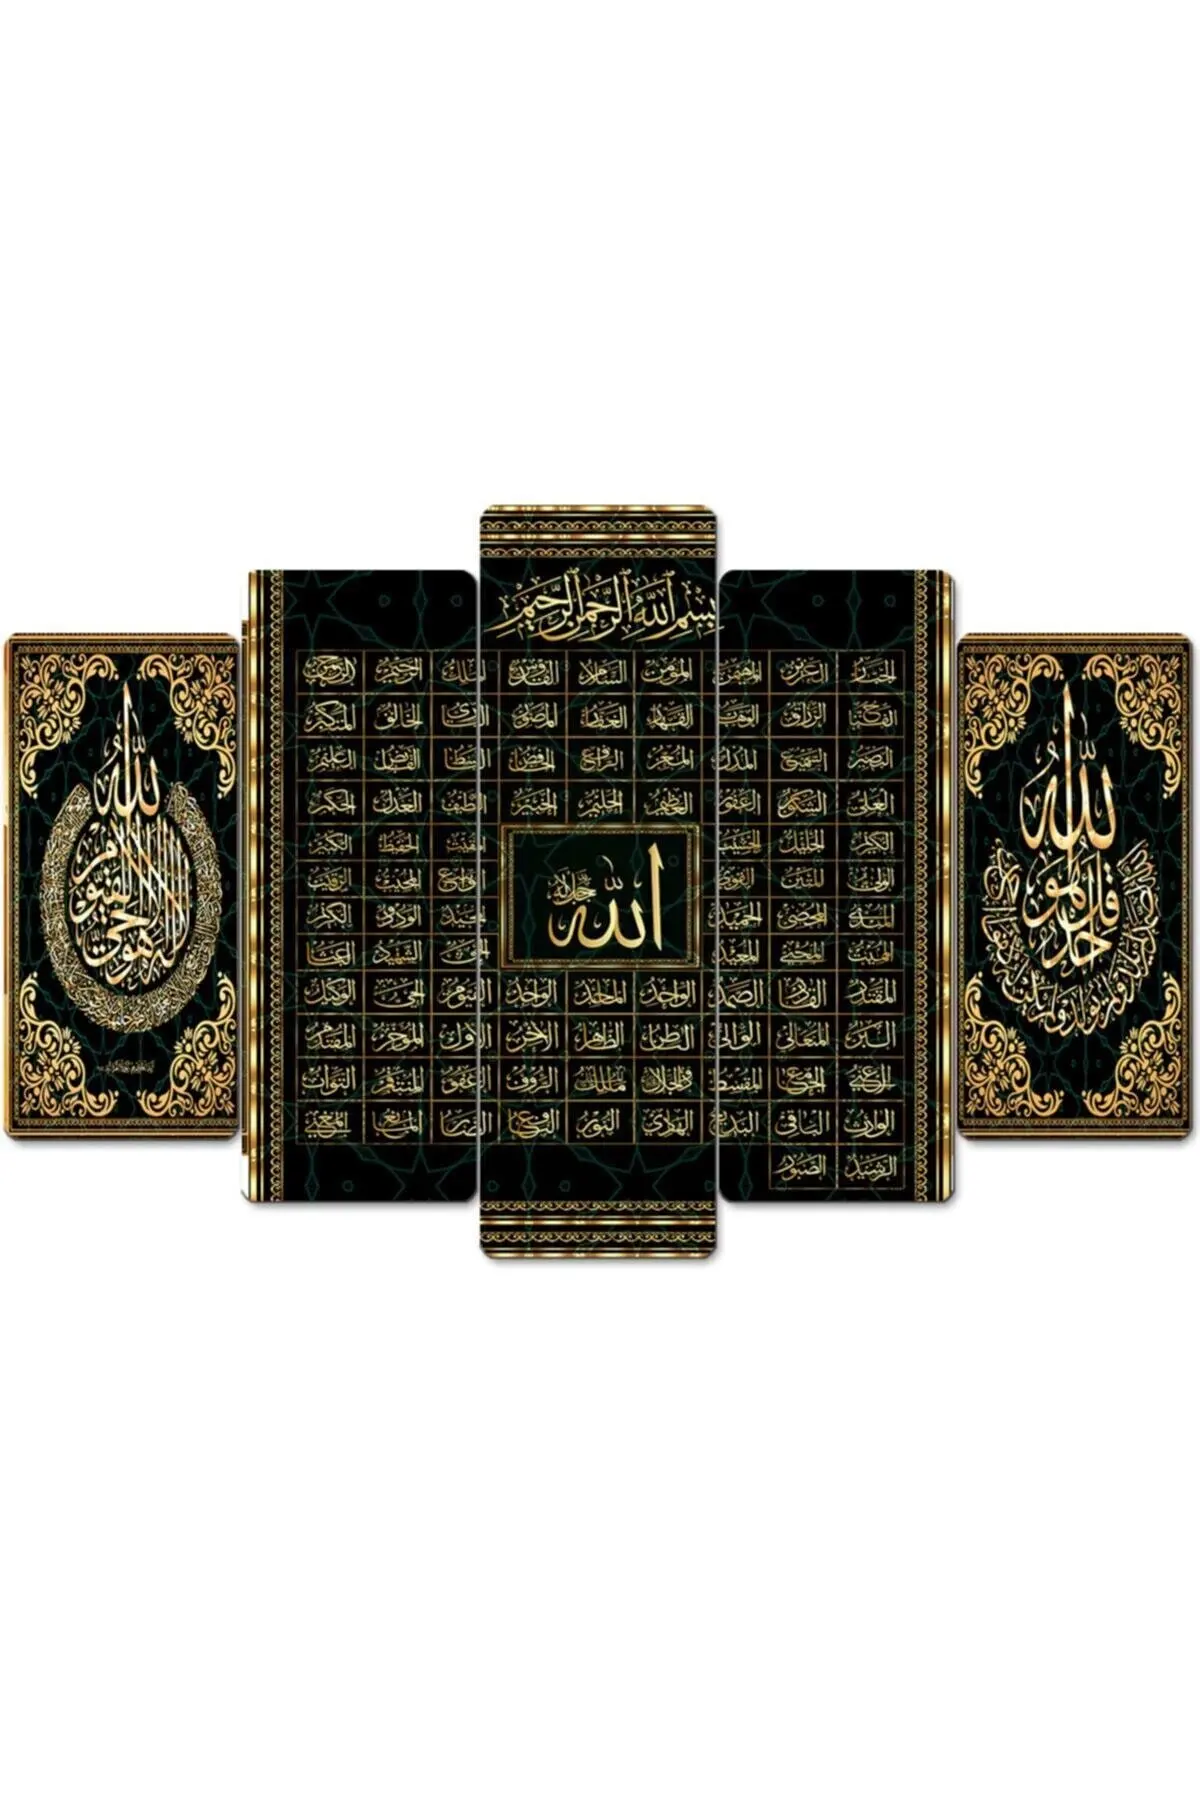 

Esma-ul Husna 99 Names Of Allah Piece Wooden Wall Painting Set 5 Pieces Mdf Islamic Art Living Room Decoration Picture Gift